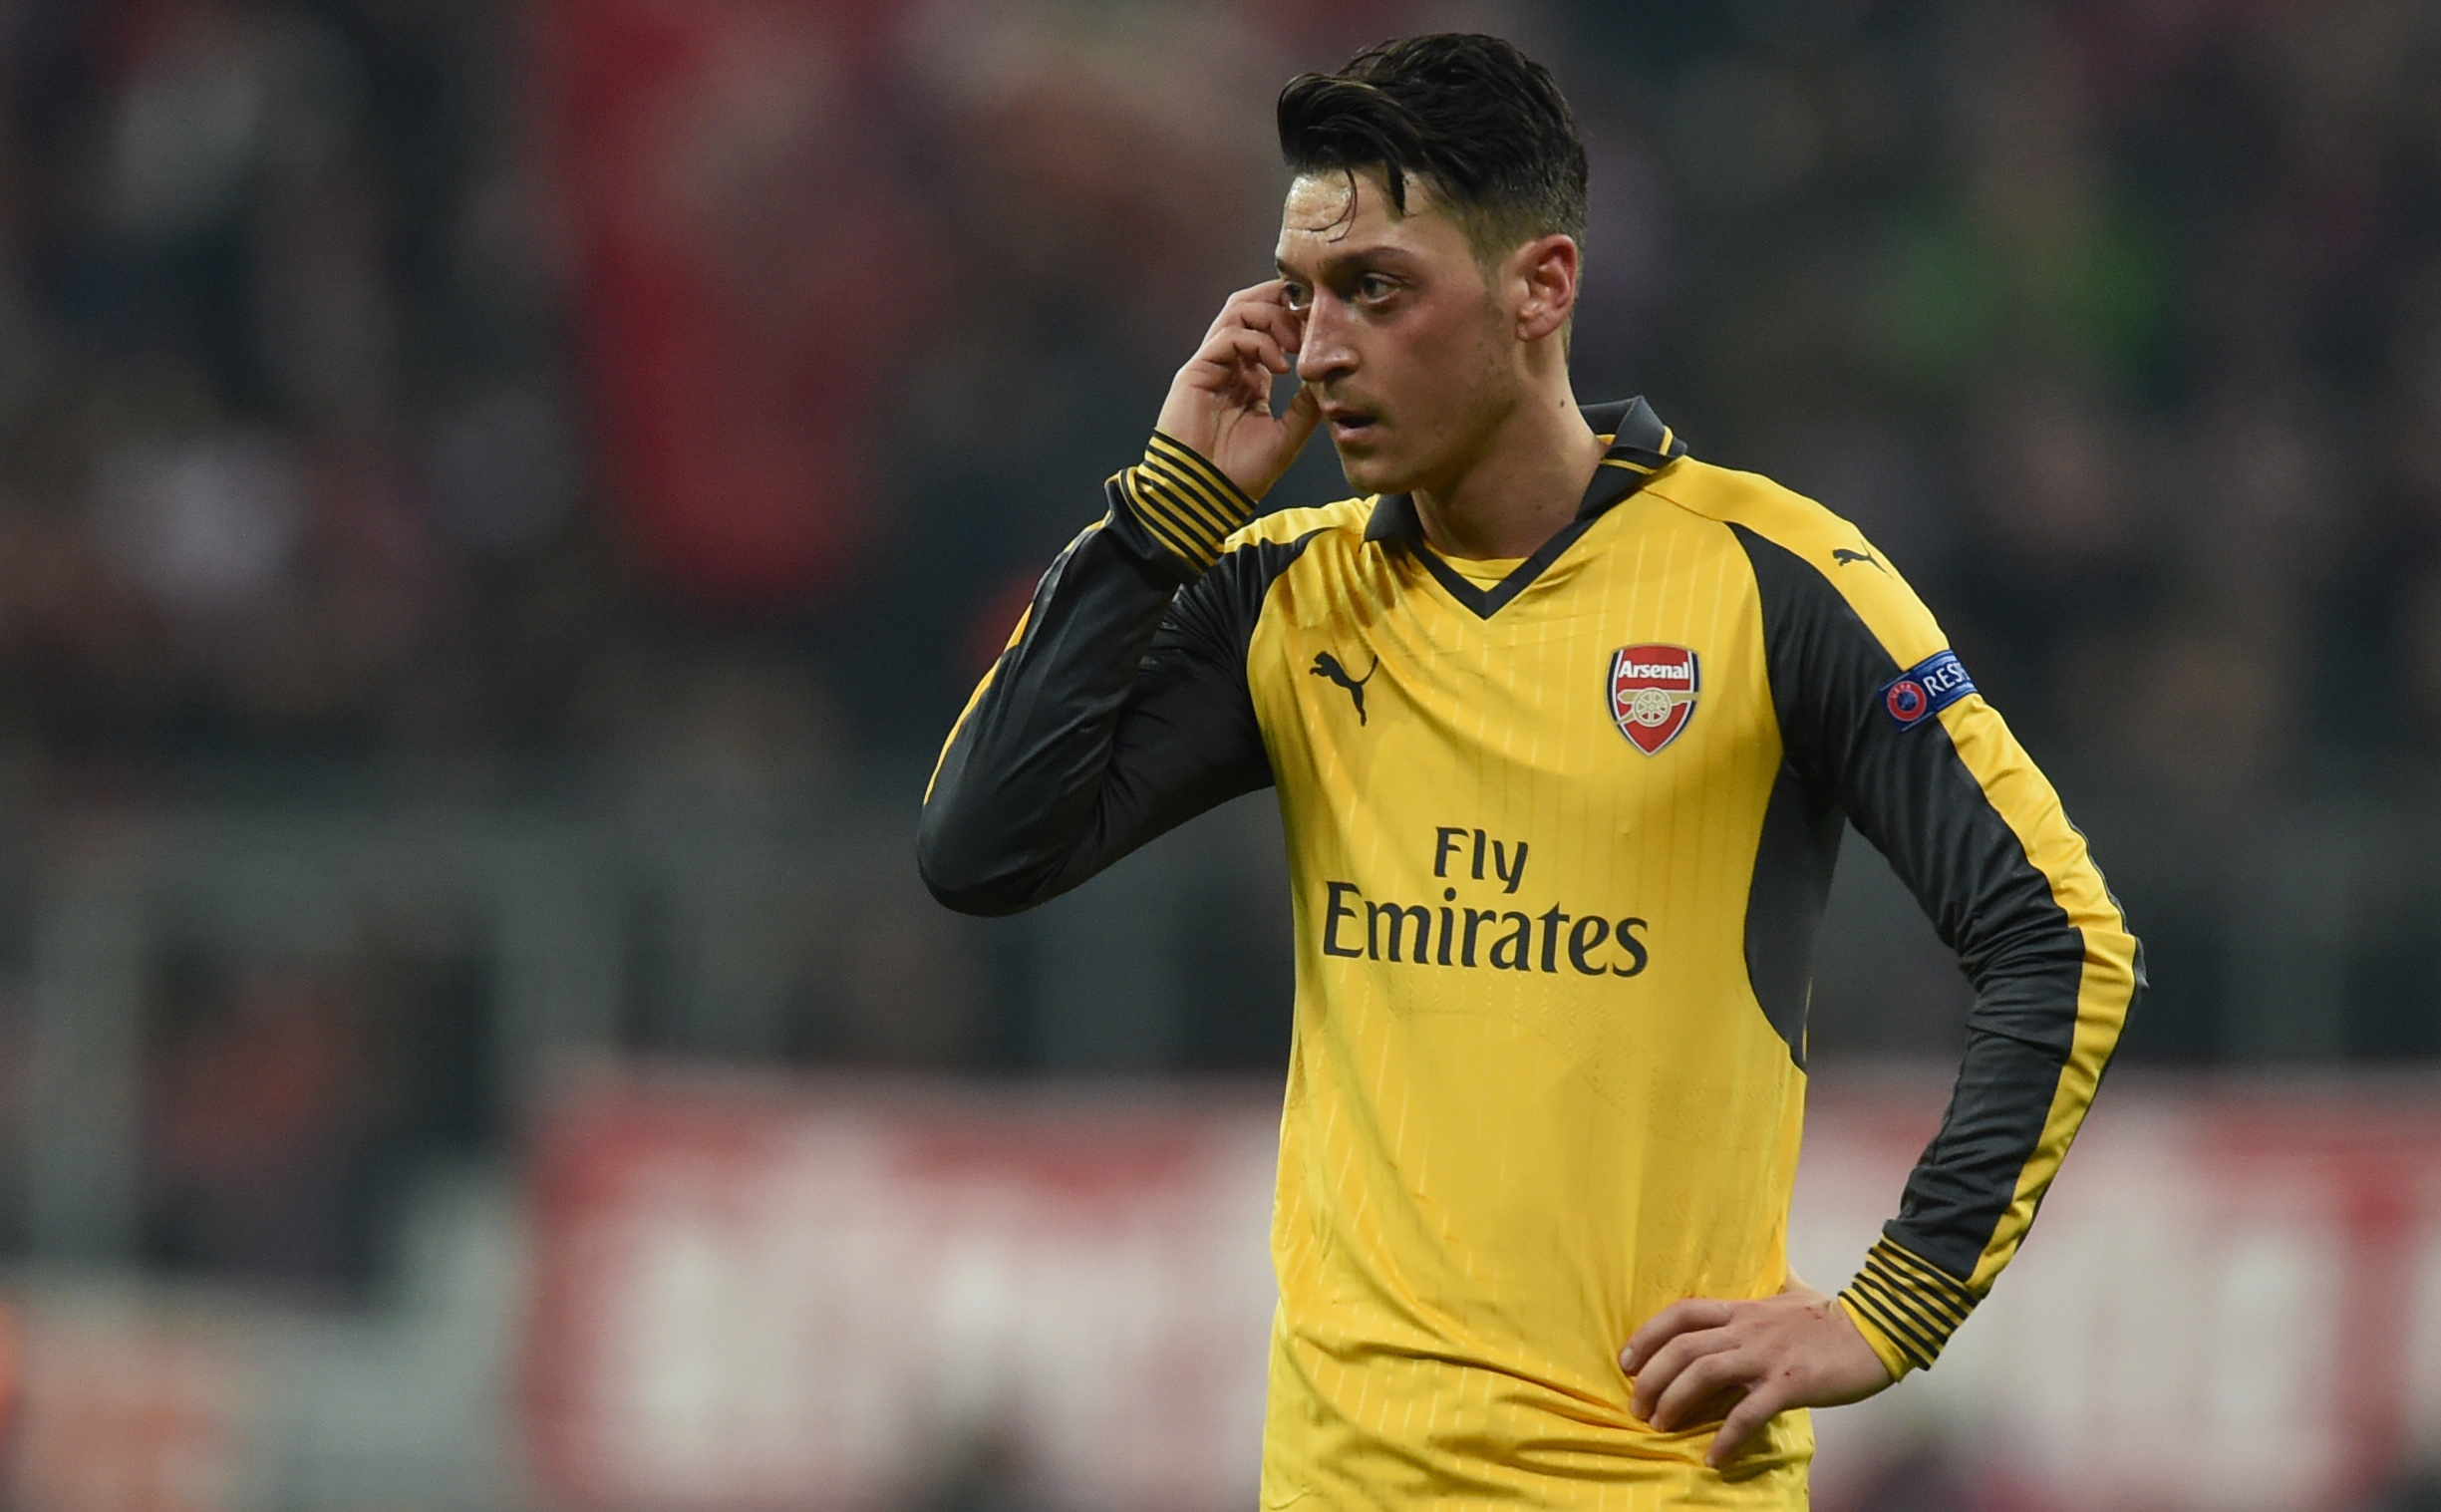 Arsenal's German midfielder Mesut Ozil reacts during the UEFA Champions League round of sixteen football match between FC Bayern Munich and Arsenal in Munich, southern Germany, on February 15, 2017.  / AFP / Christof STACHE        (Photo credit should read CHRISTOF STACHE/AFP/Getty Images)